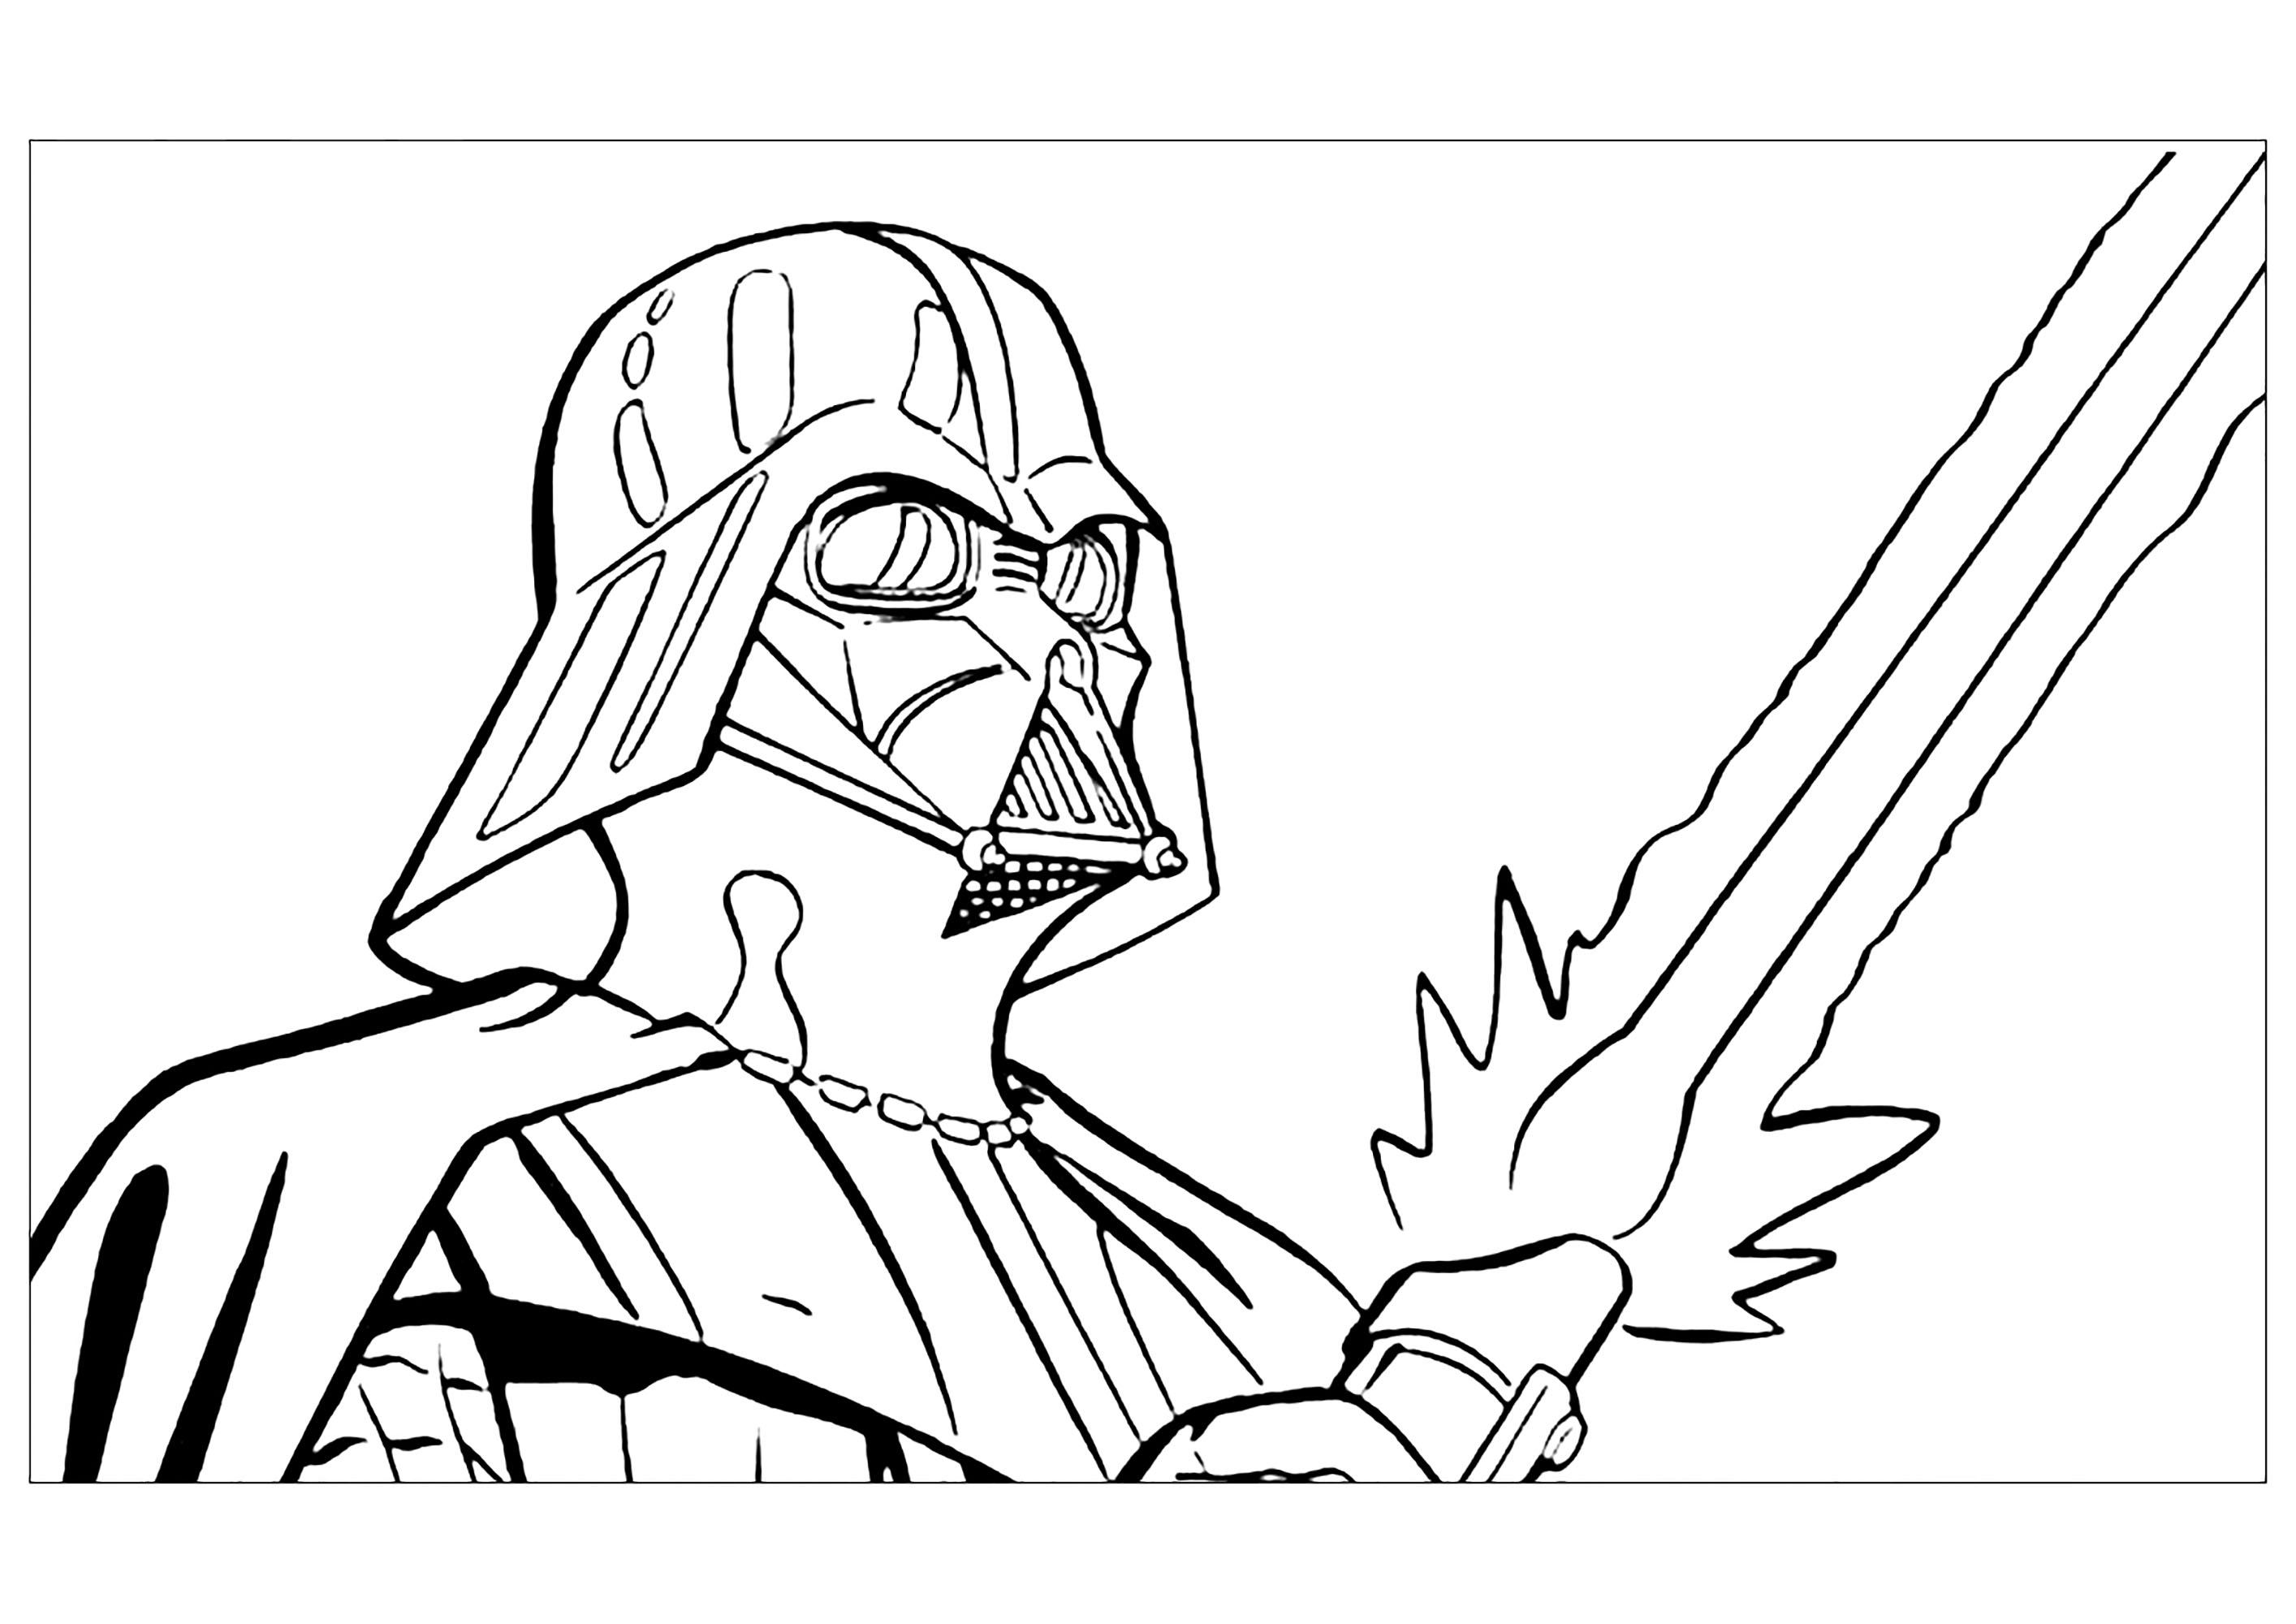 Star Wars For Kids Star Wars Kids Coloring Pages